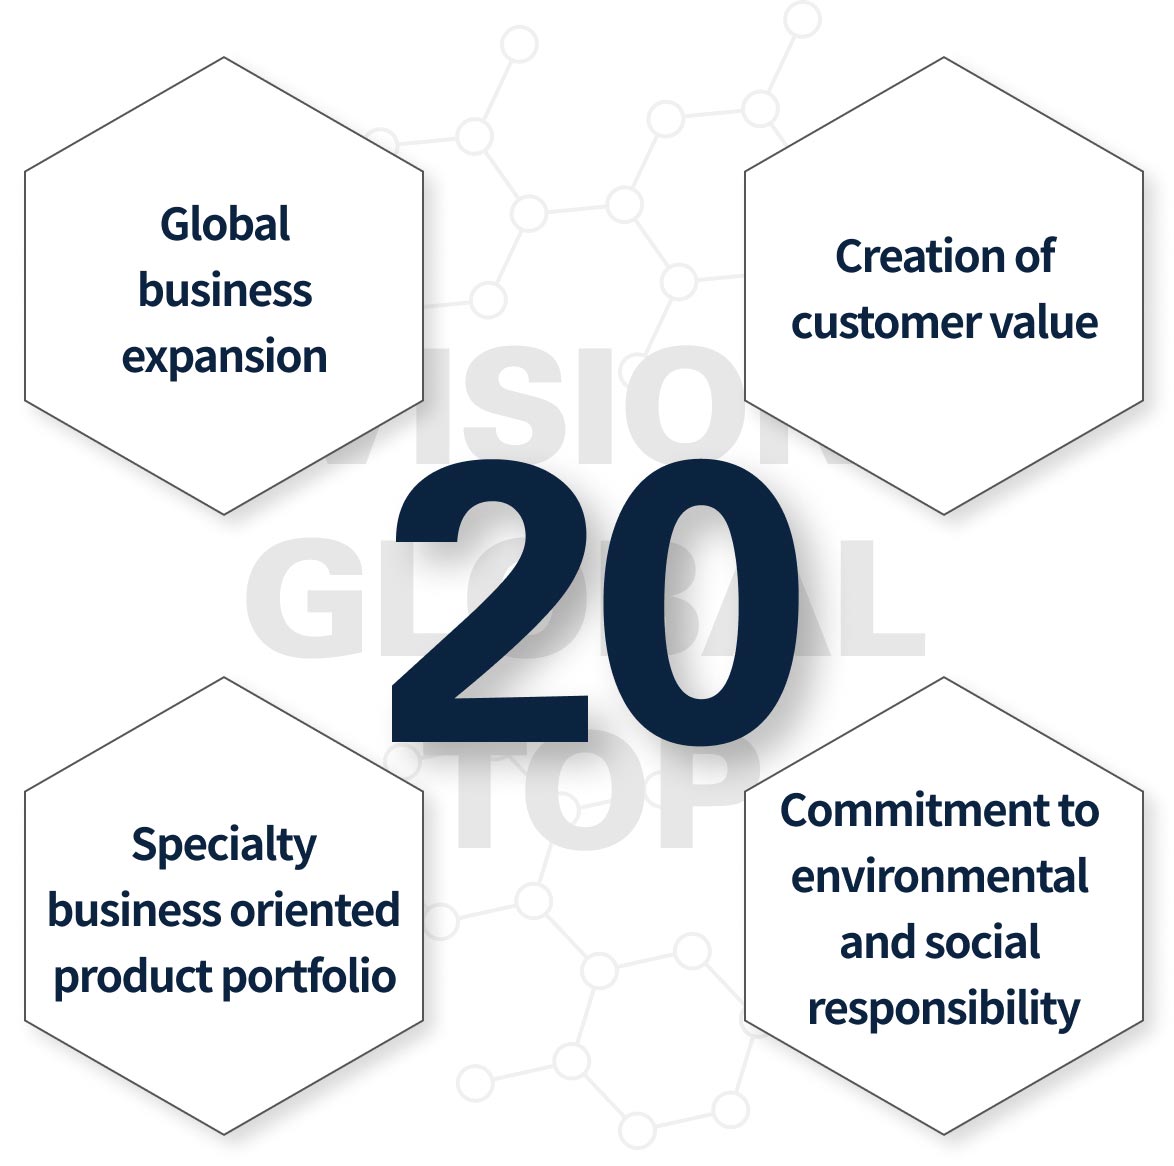 VISION GLOBAL TOP 20, Global business expansion, Specialty business Portfolio expansion, Customer value creation, Practicing environmental and social responsibility